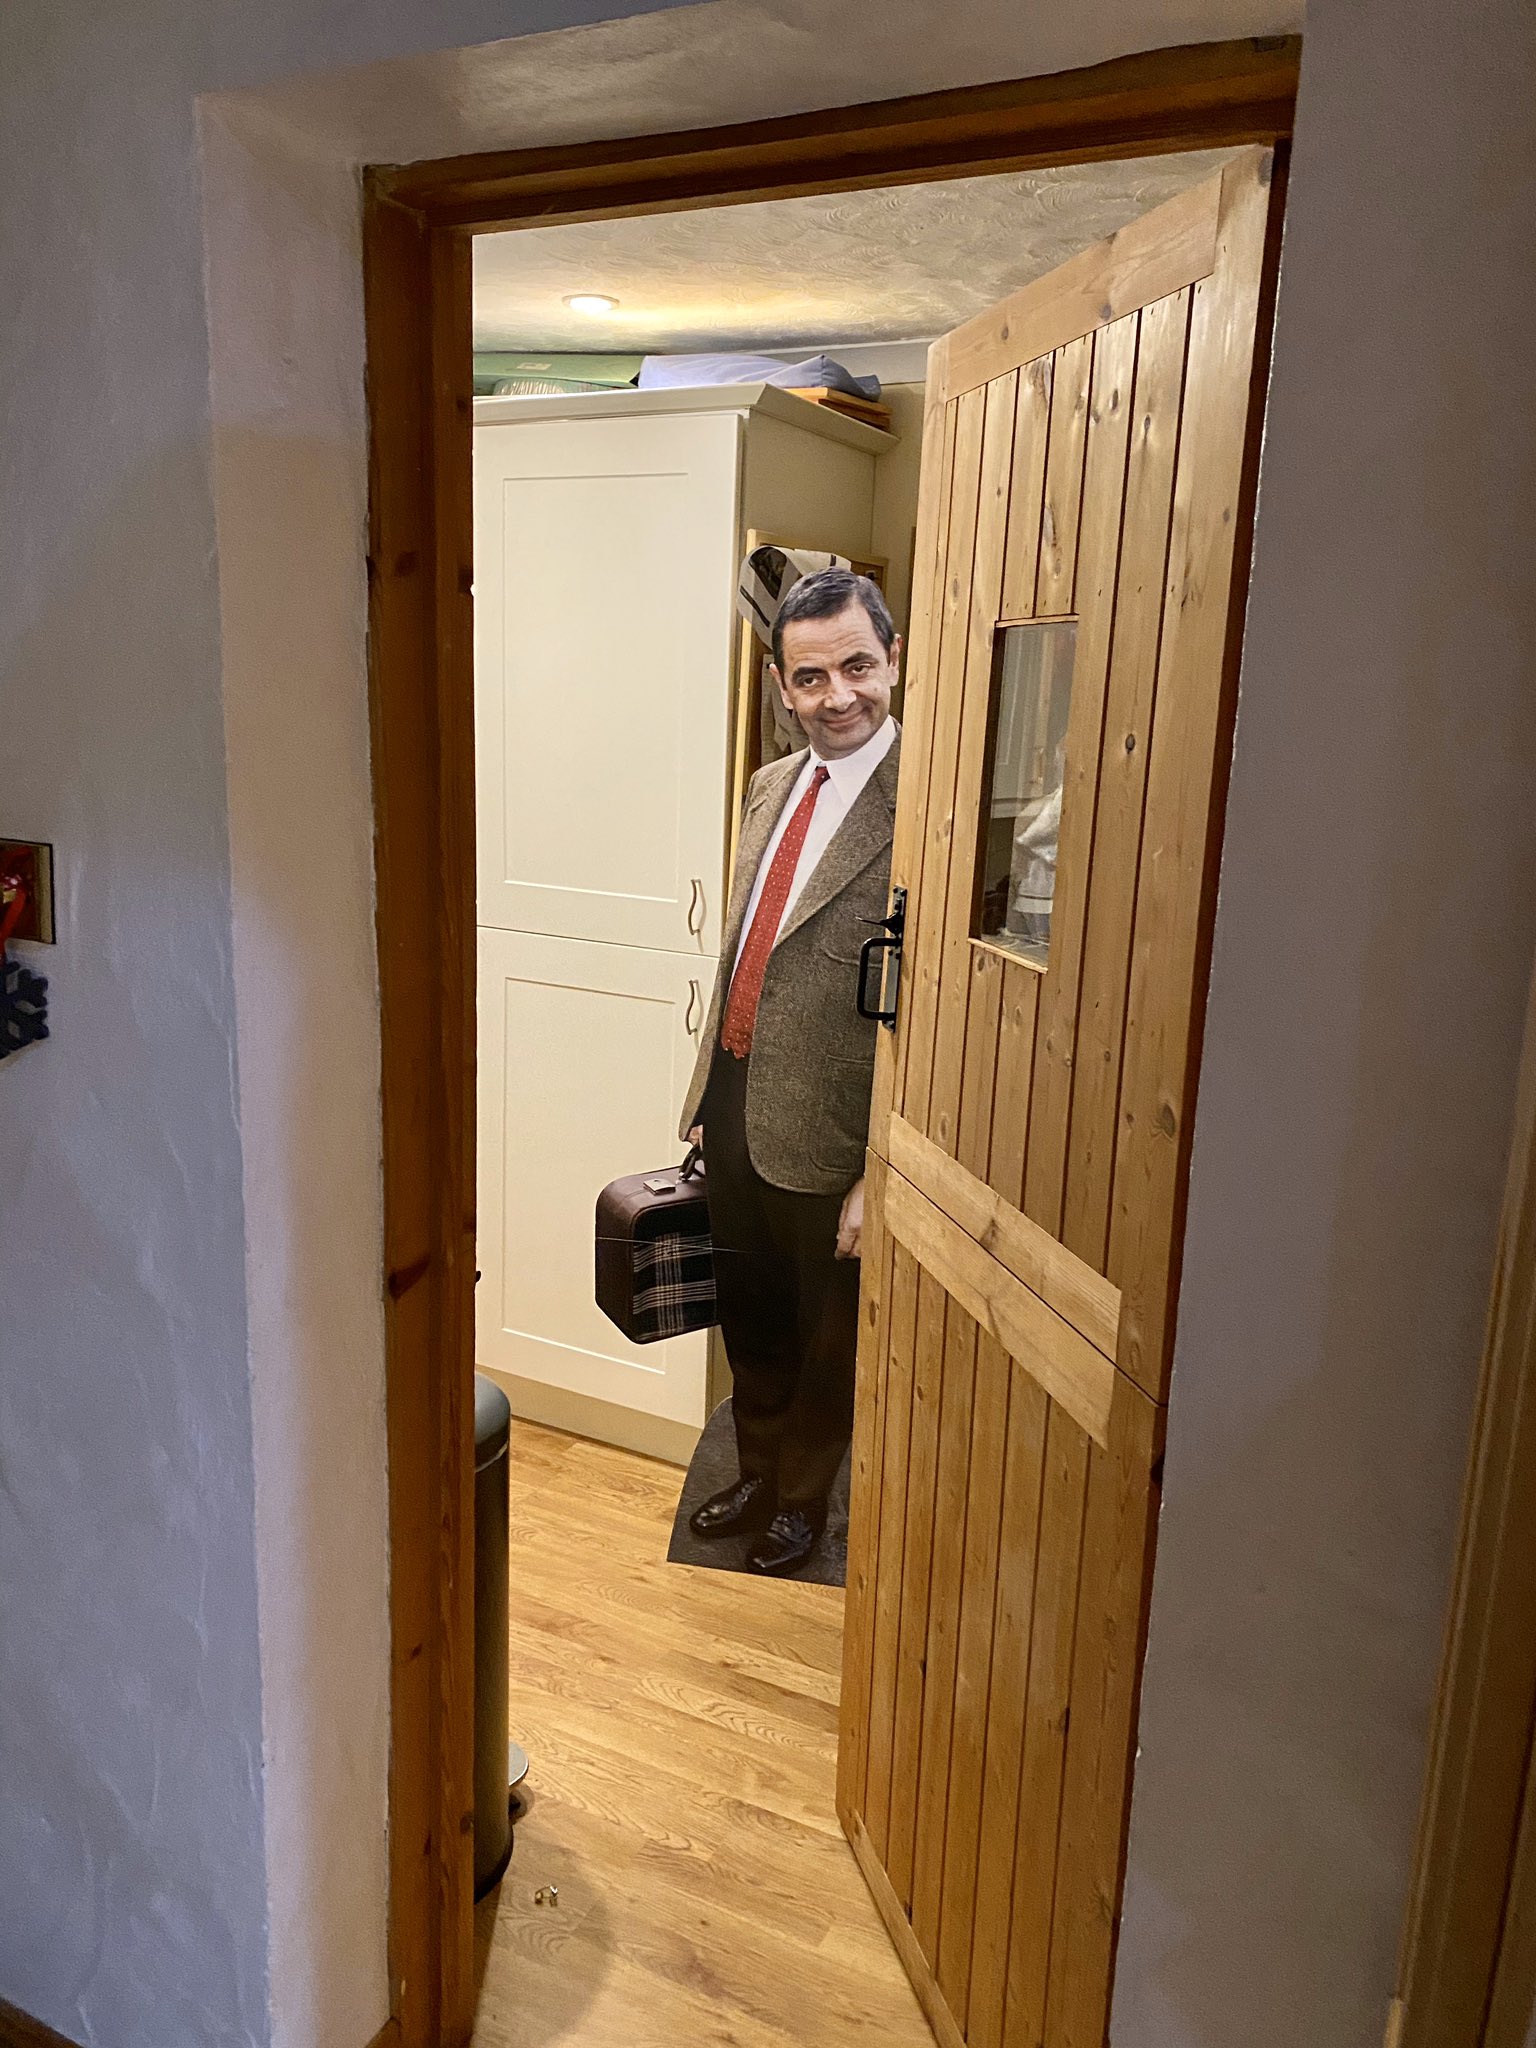 Harry On Twitter Gave My Dad Mr Bean Cut Out For Christmas And He S Been Moving It Around The House To Scare My Mum